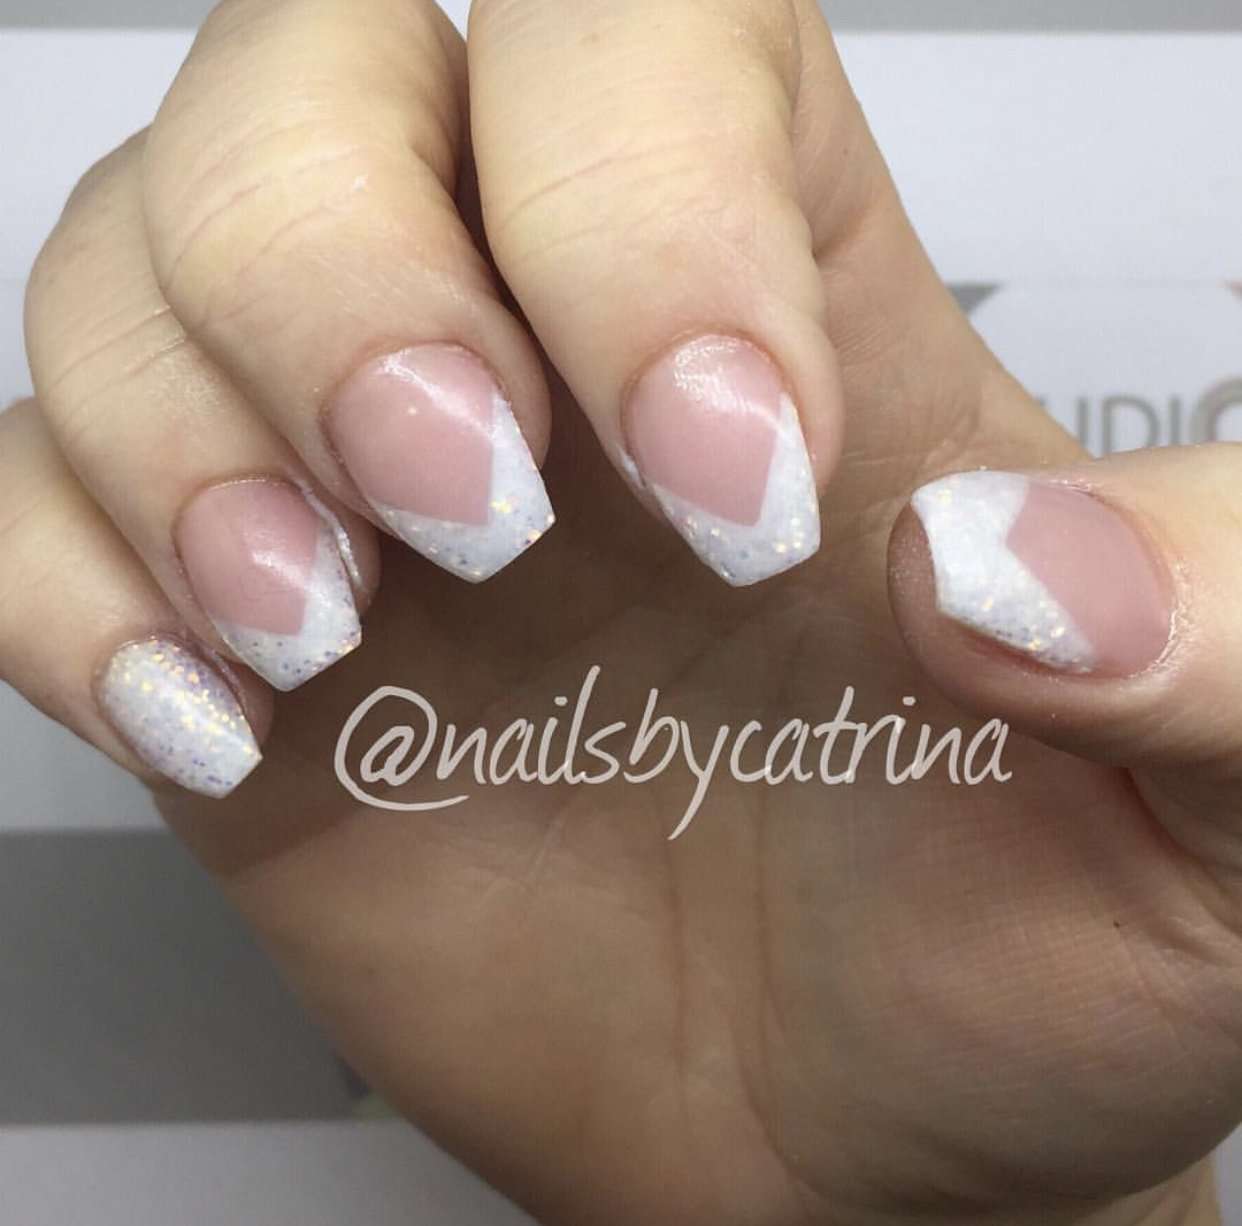 Are Dip Nails The Same As Acrylic?